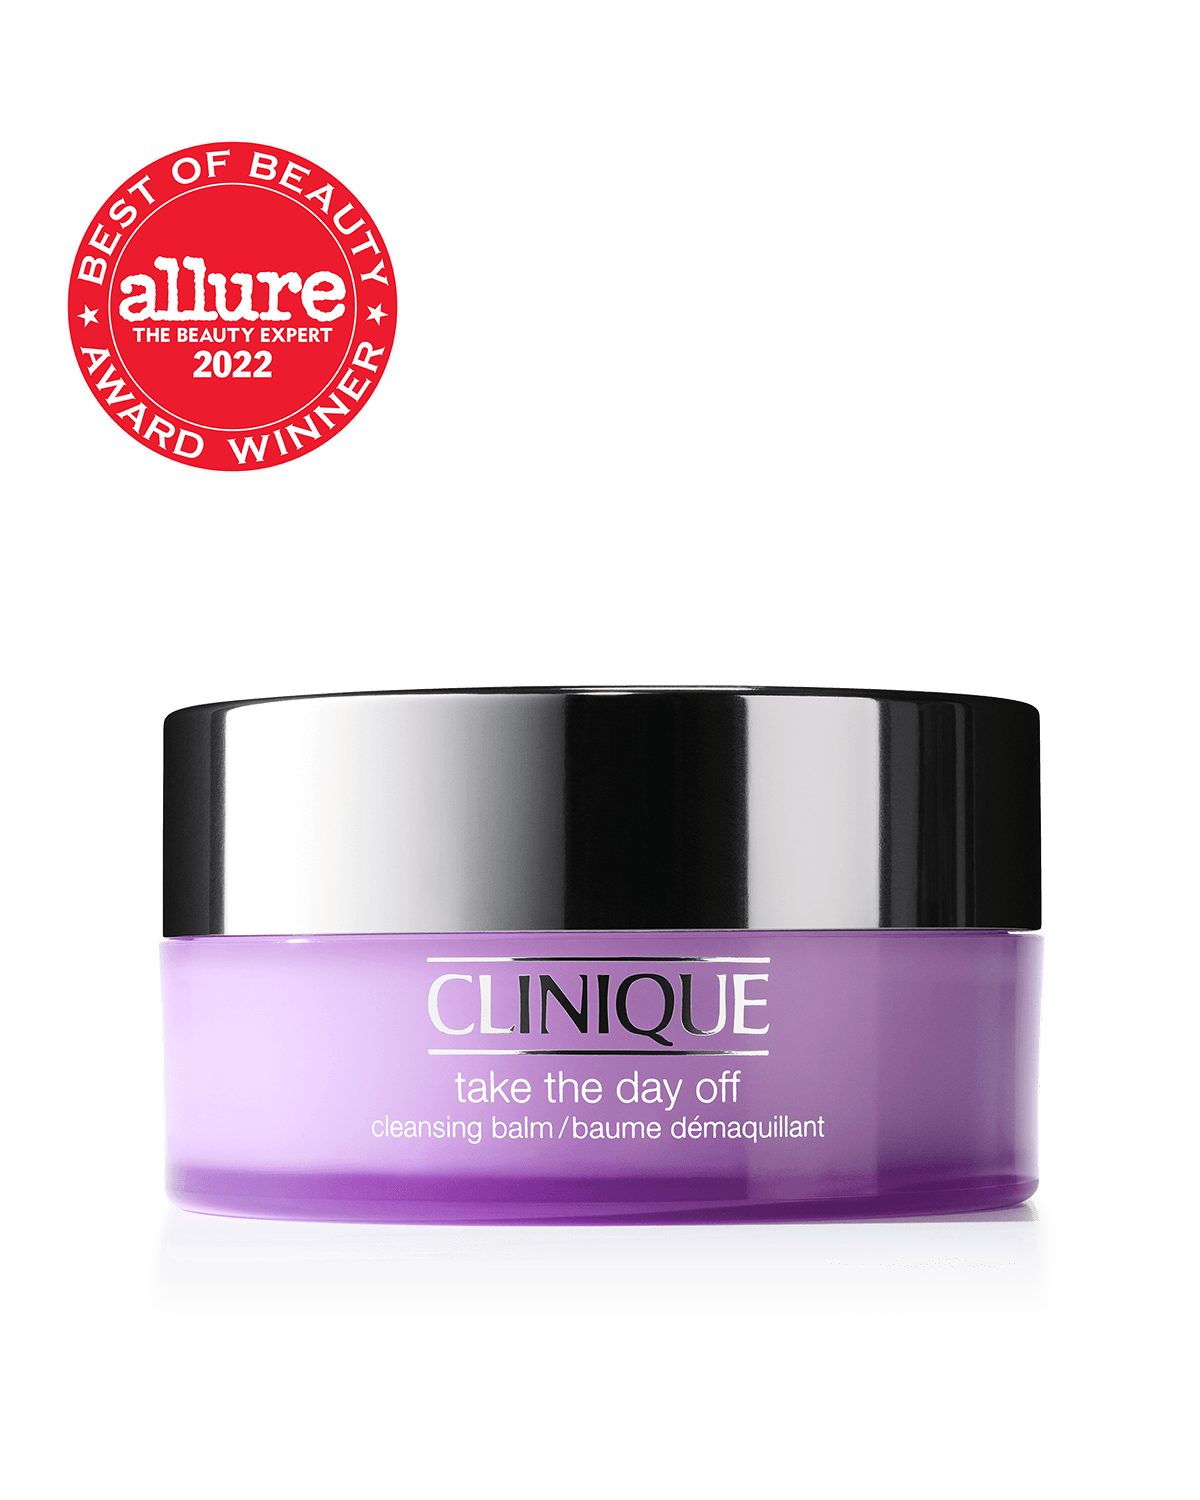 A clinique Take The Day Off™ Cleansing Balm